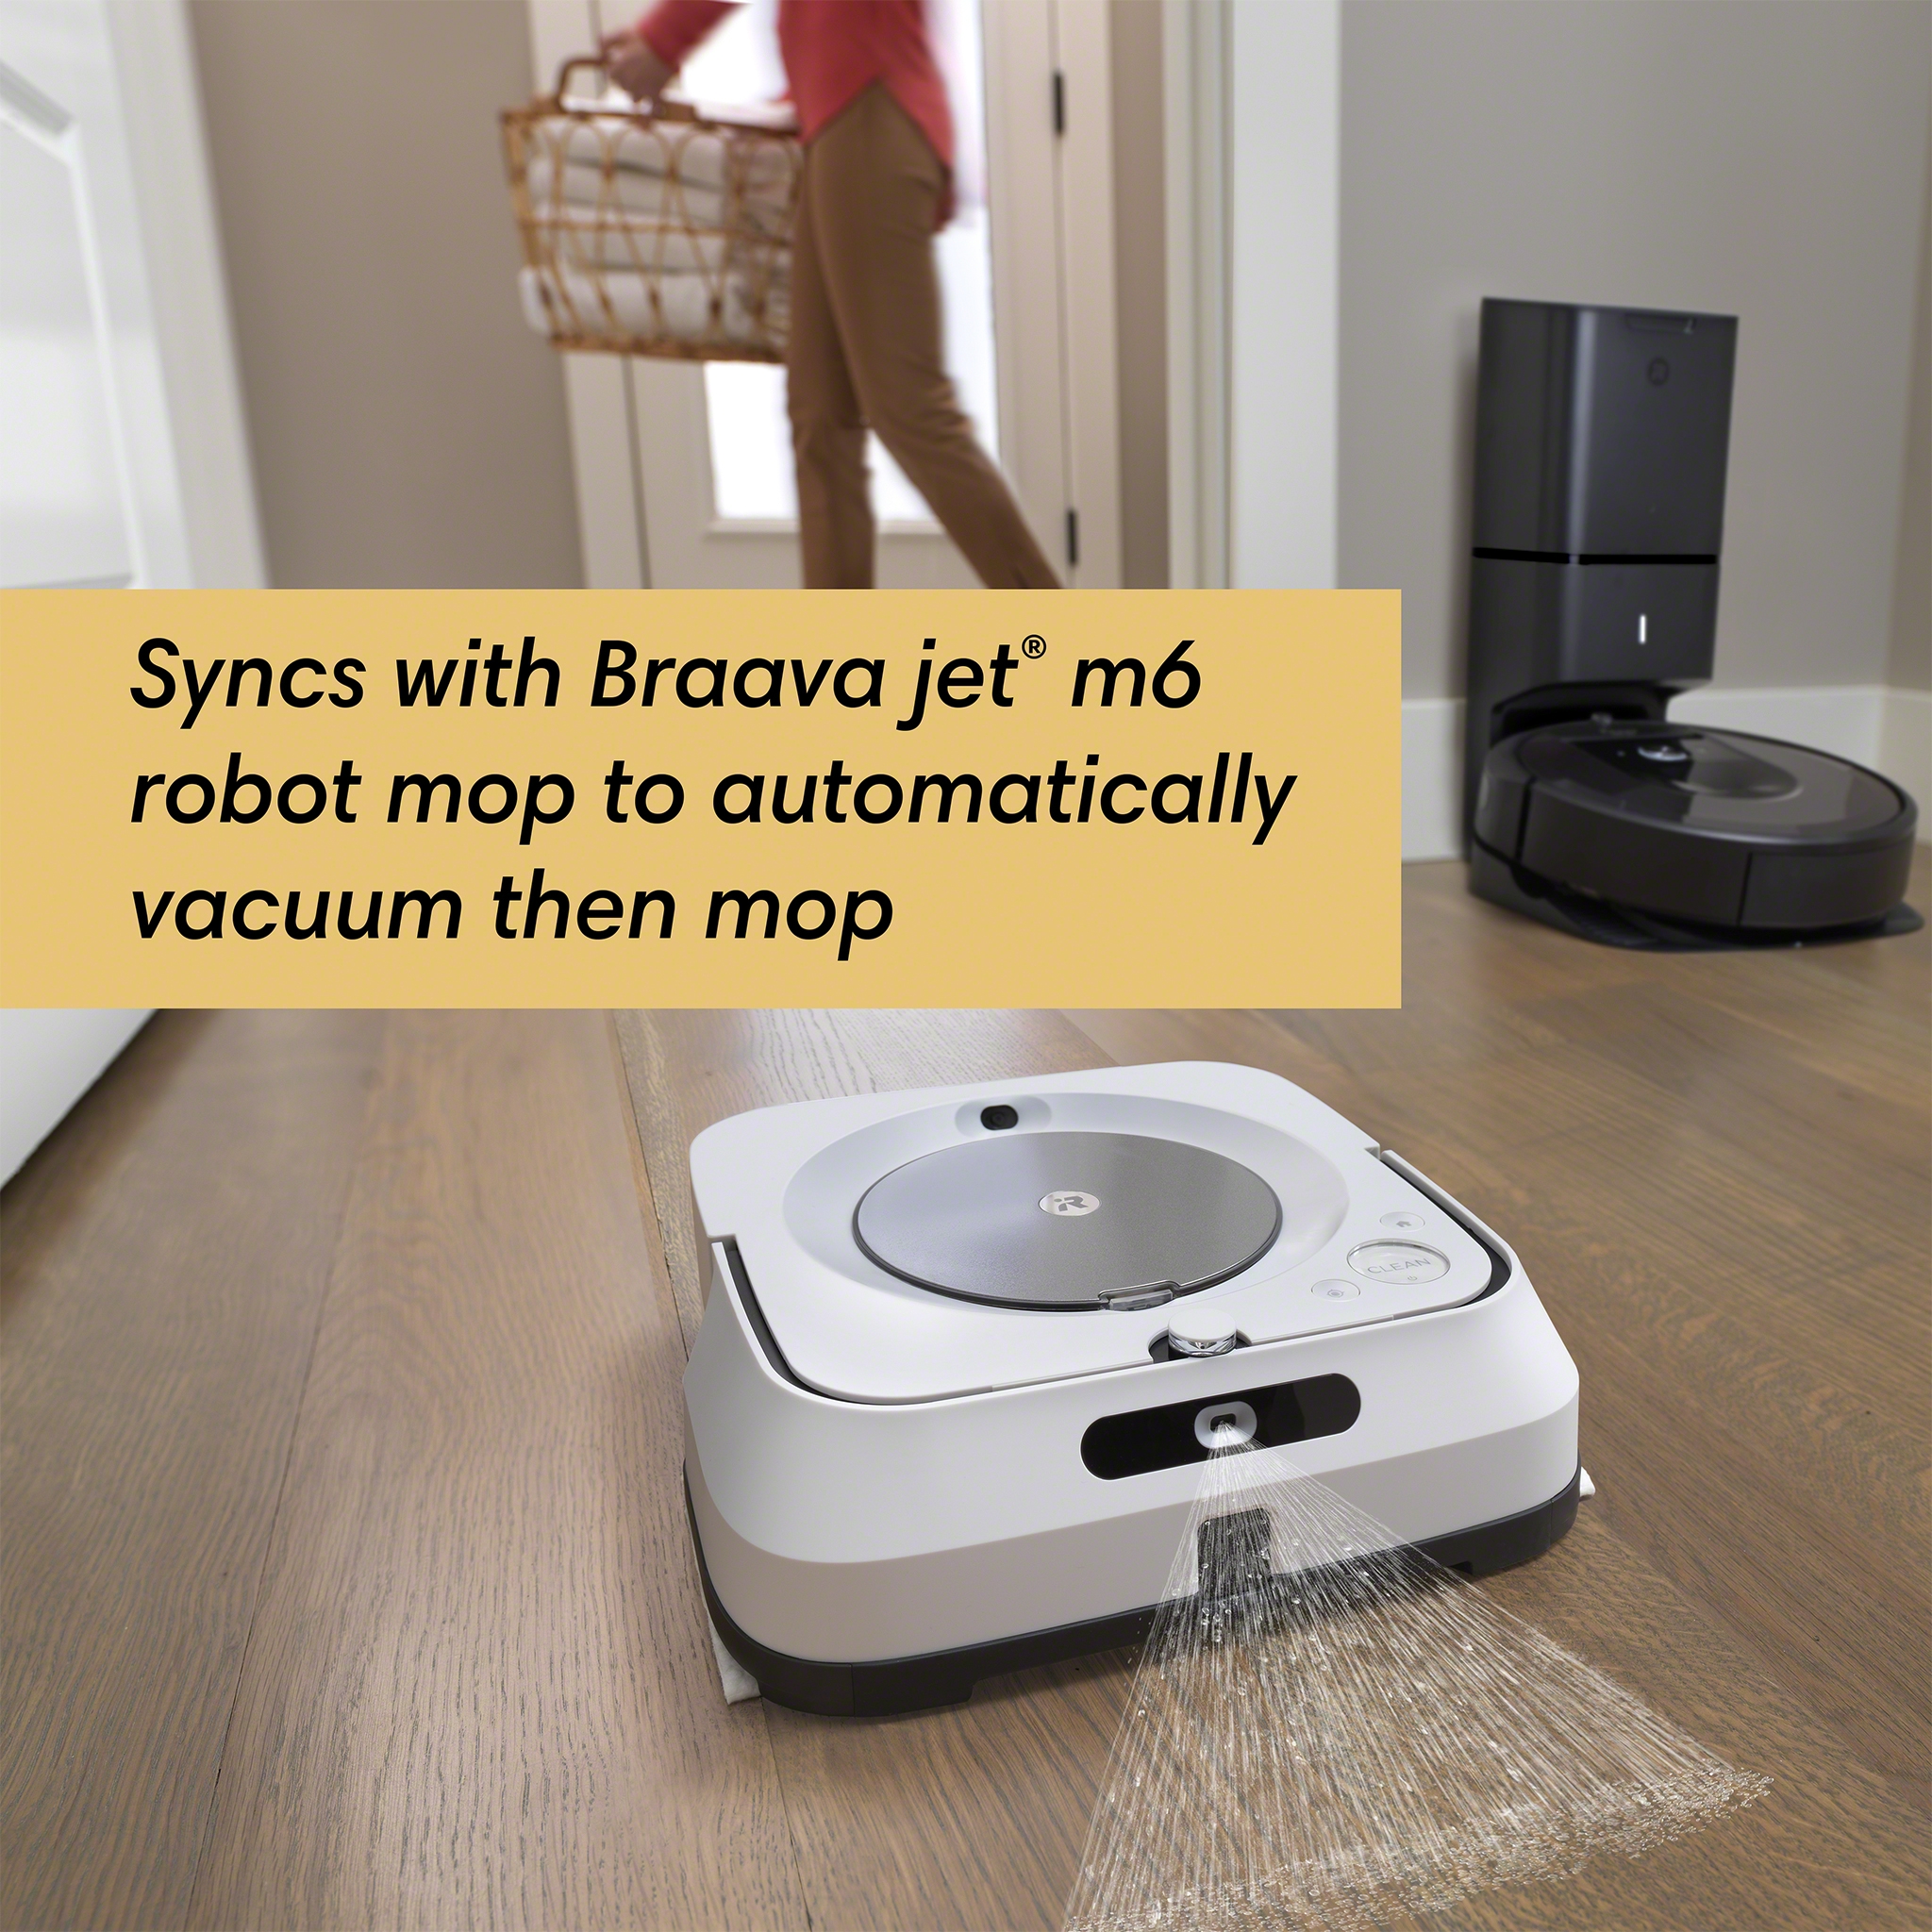 iRobot Braava Jet M6 (6110) Ultimate Robot Mop- Wi-Fi Connected, Precision Jet Spray, Smart Mapping, Works with Google Home, Ideal for Multiple Rooms, Recharges and Resumes - image 13 of 23